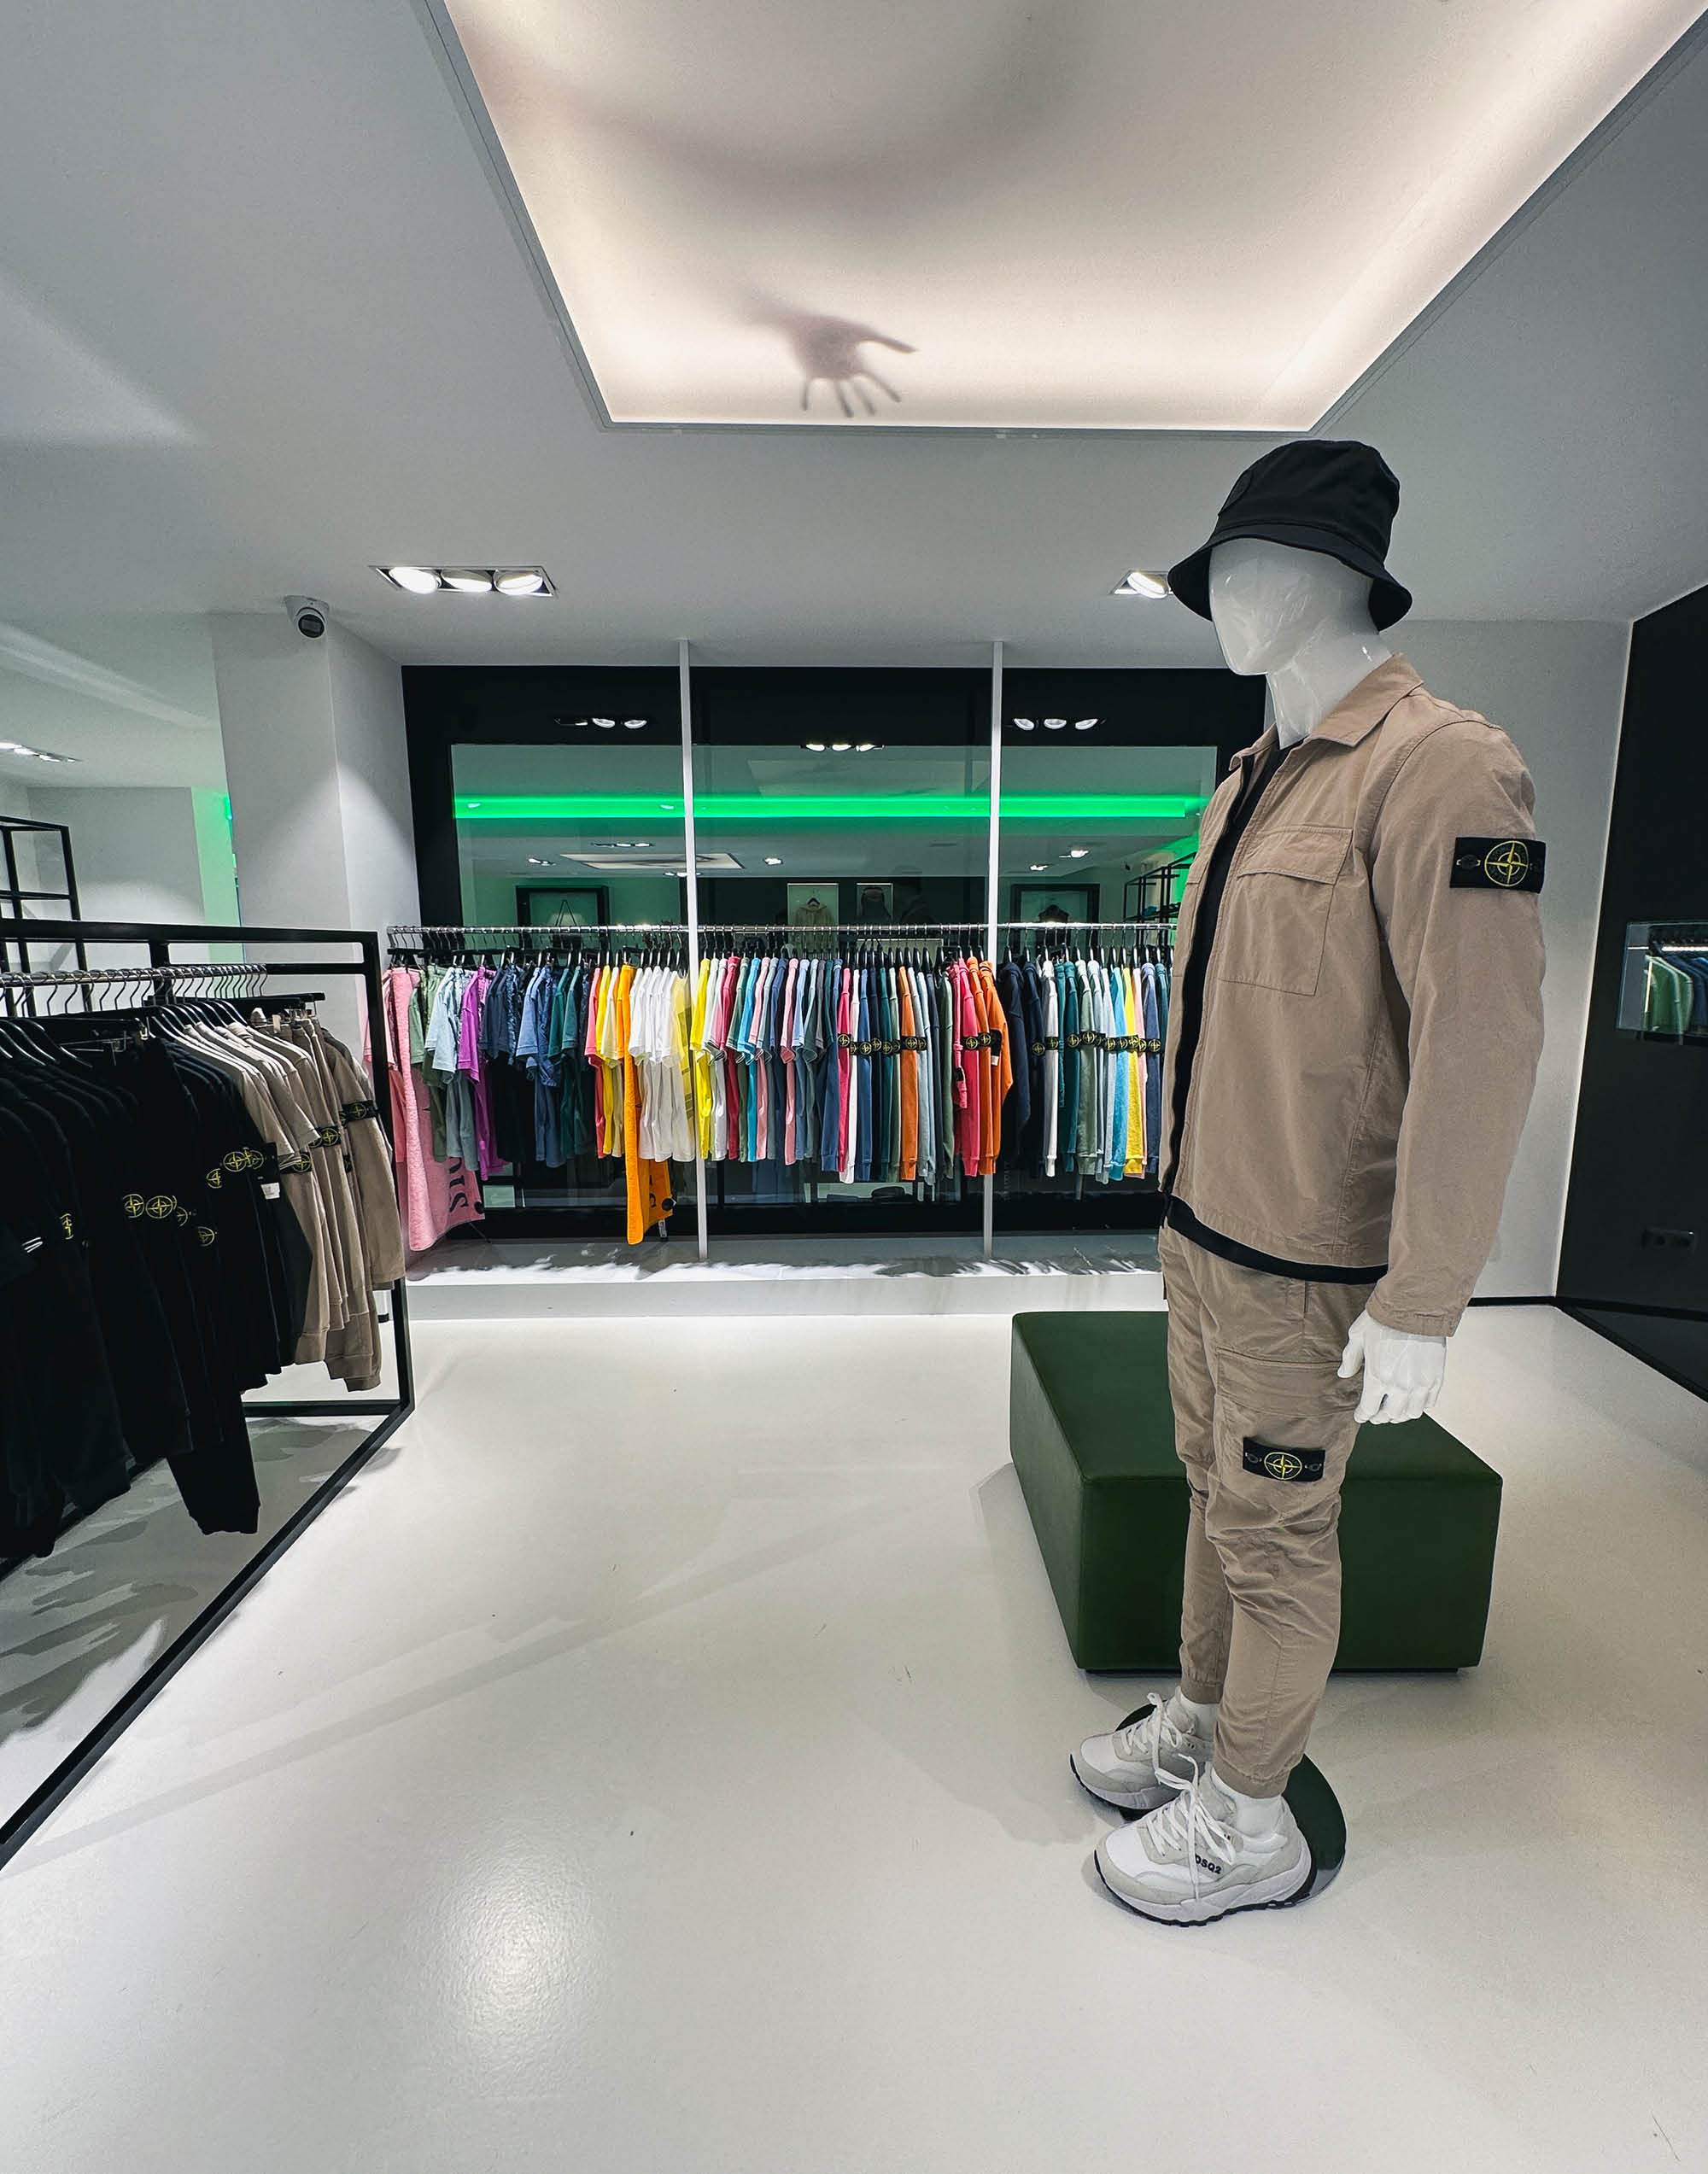 VIP is a high-end fashionstore